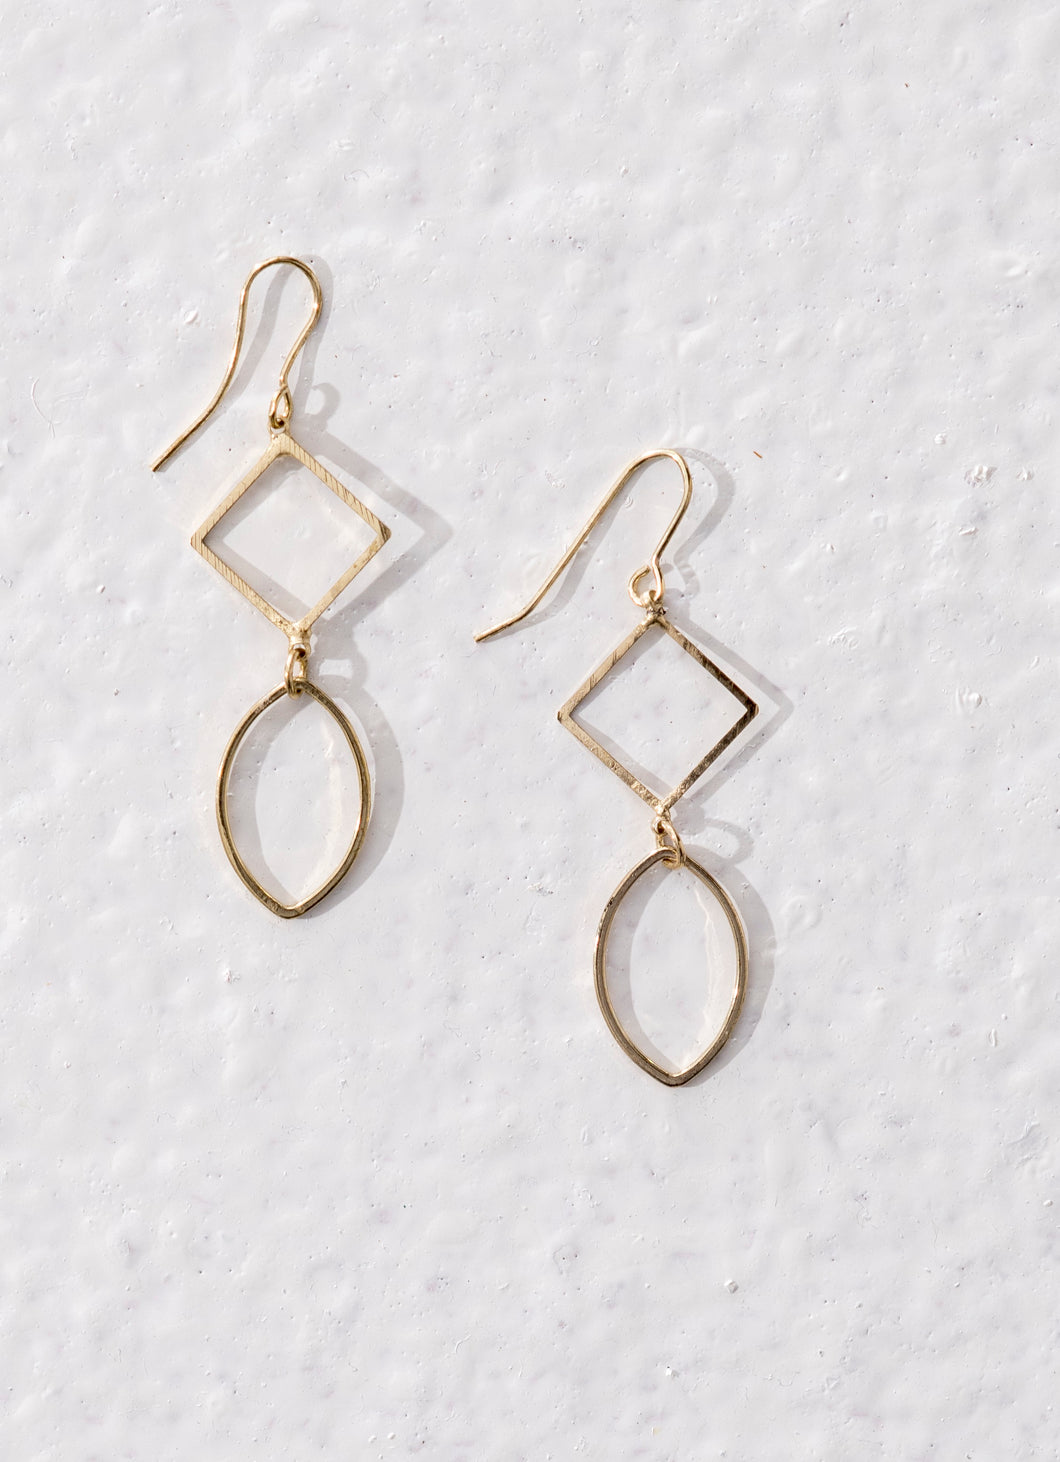 Fair trade ethical jewellery. Drop earrings made of brass. Sustainable fashion and vegan.